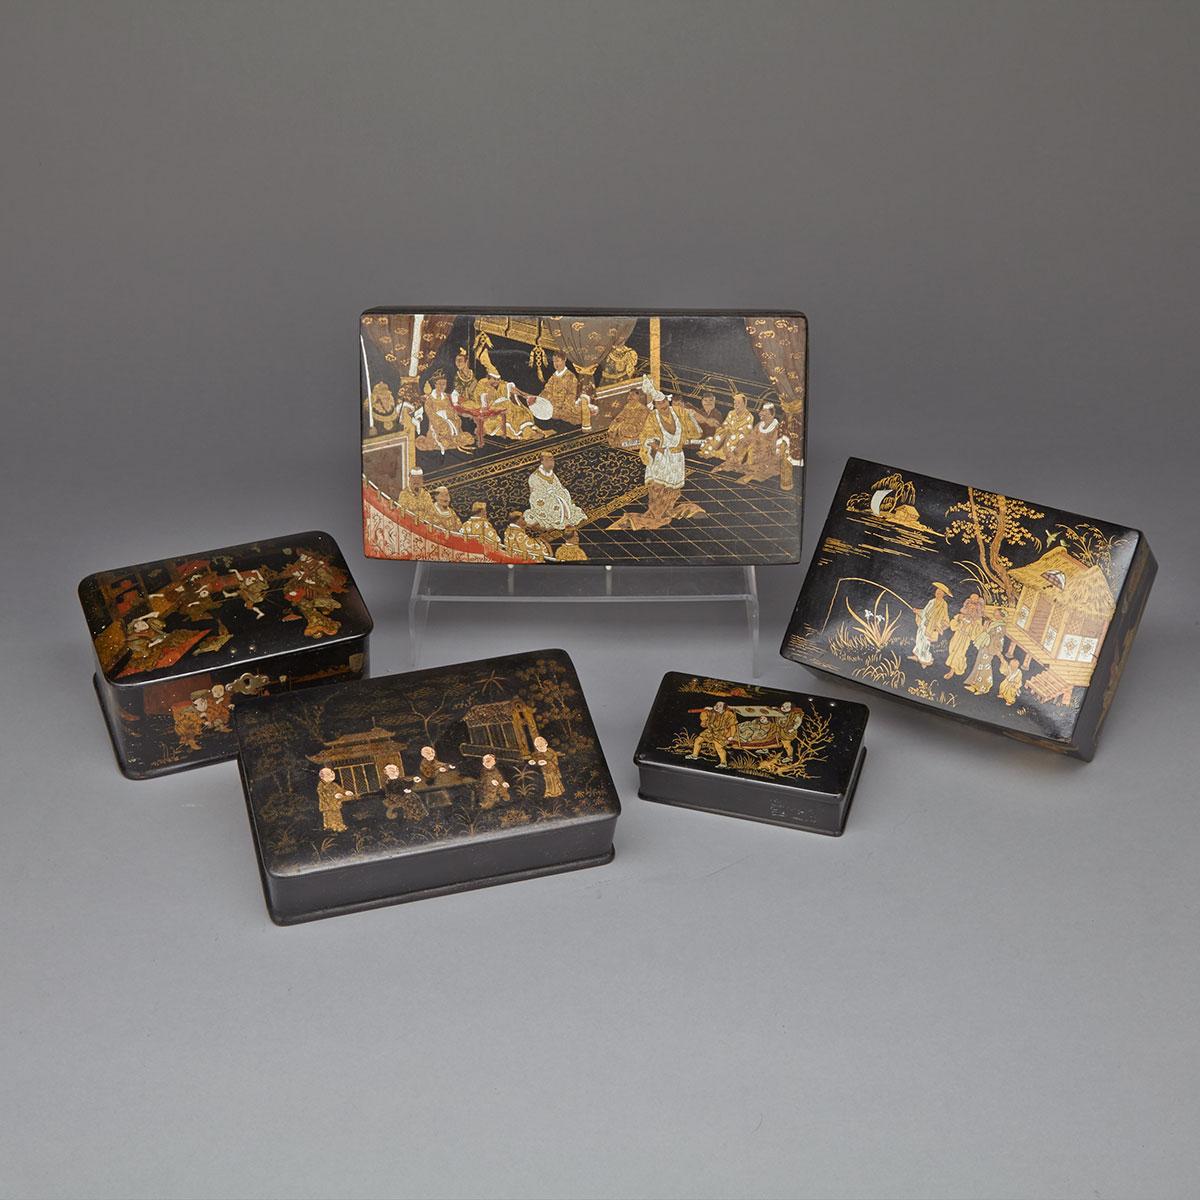 GROUP OF FIVE CHINOISERIE lacquered PAPIER MACHÉ BOXES, 19TH CENTURY